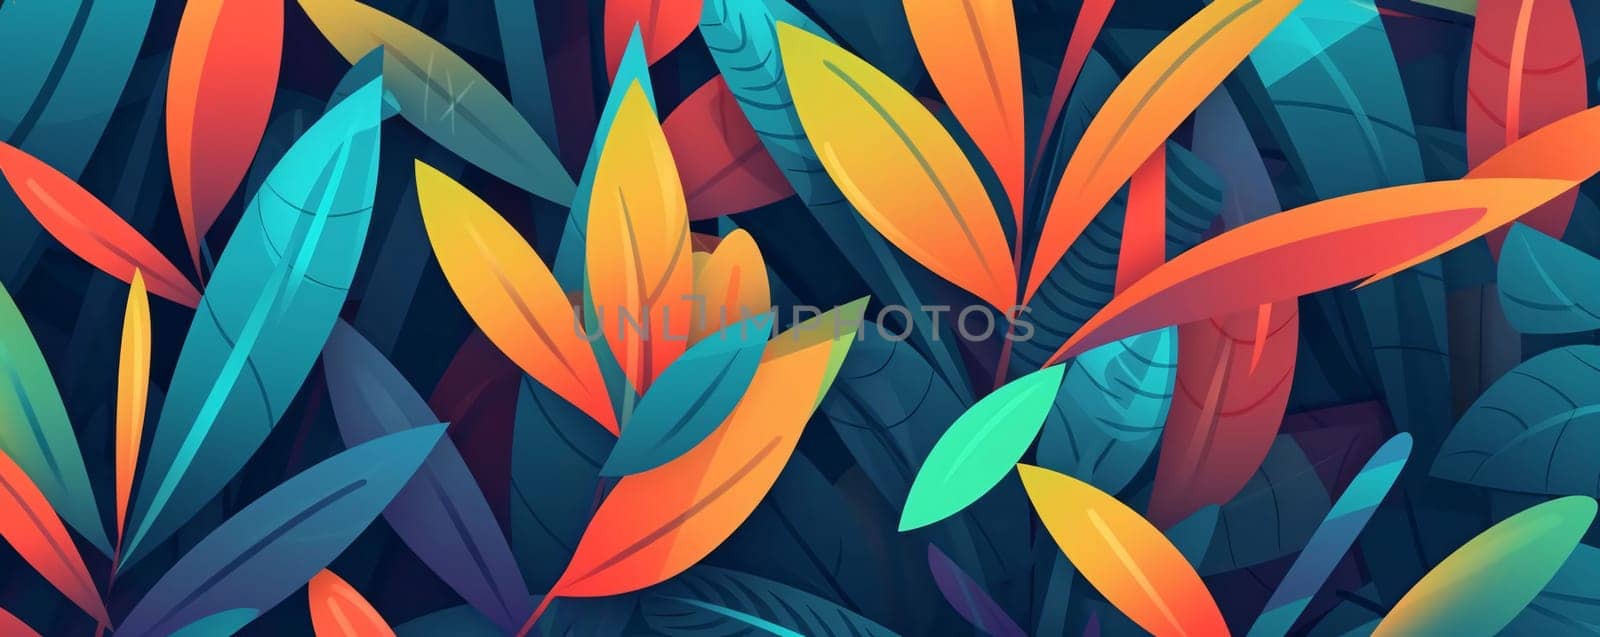 Abstract background design: Seamless pattern with tropical leaves. Vector illustration in flat style